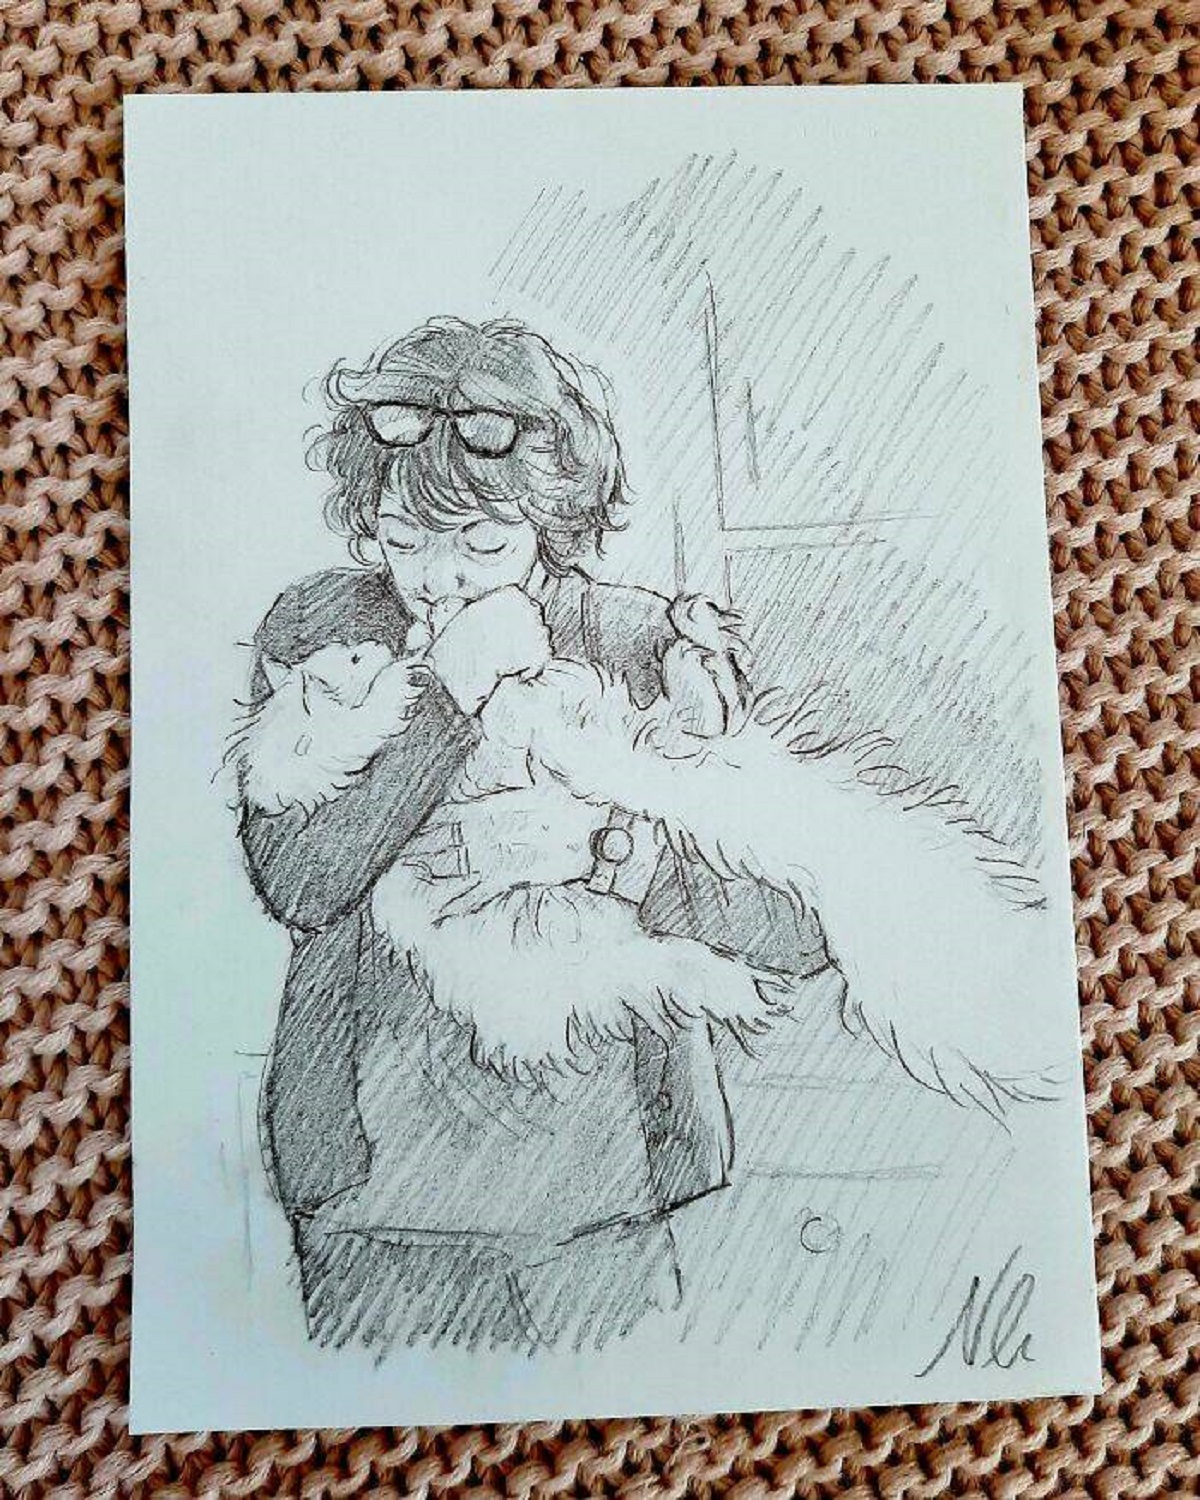 "I Drew My My Mom And Her Cat For Mother's Day"